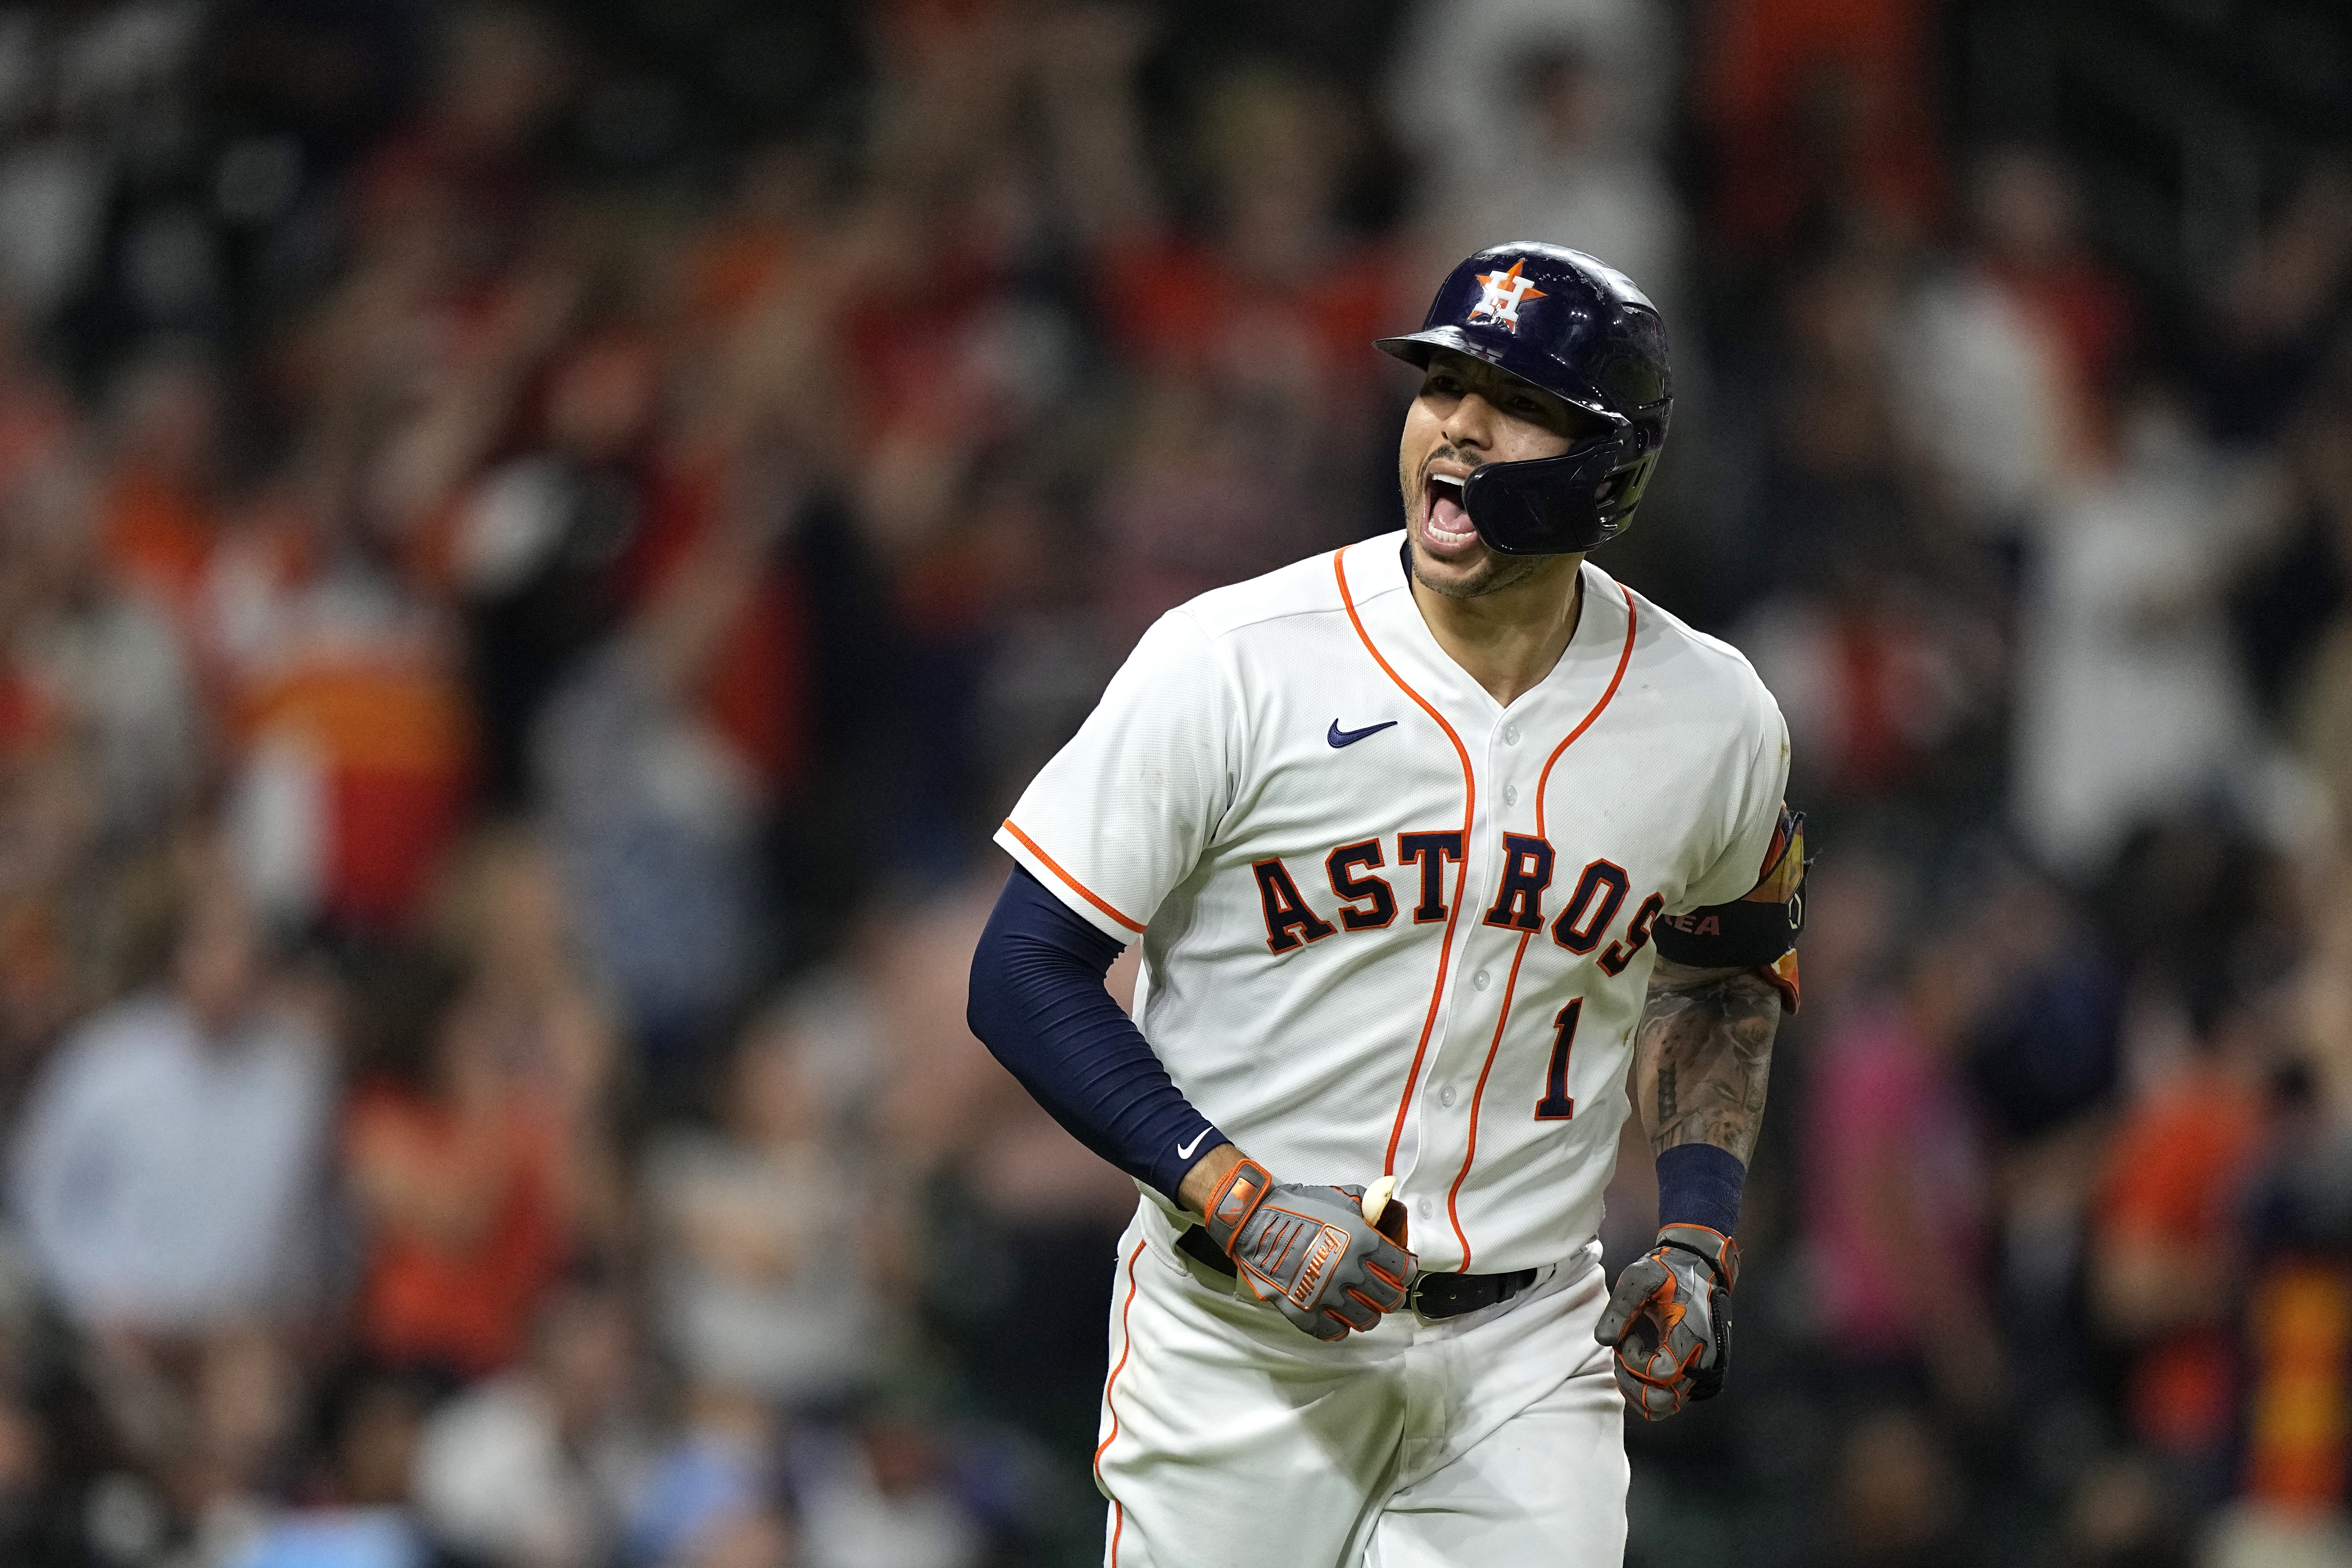 Our Esquina on X: Congrats are in order for Astros RHP Jose